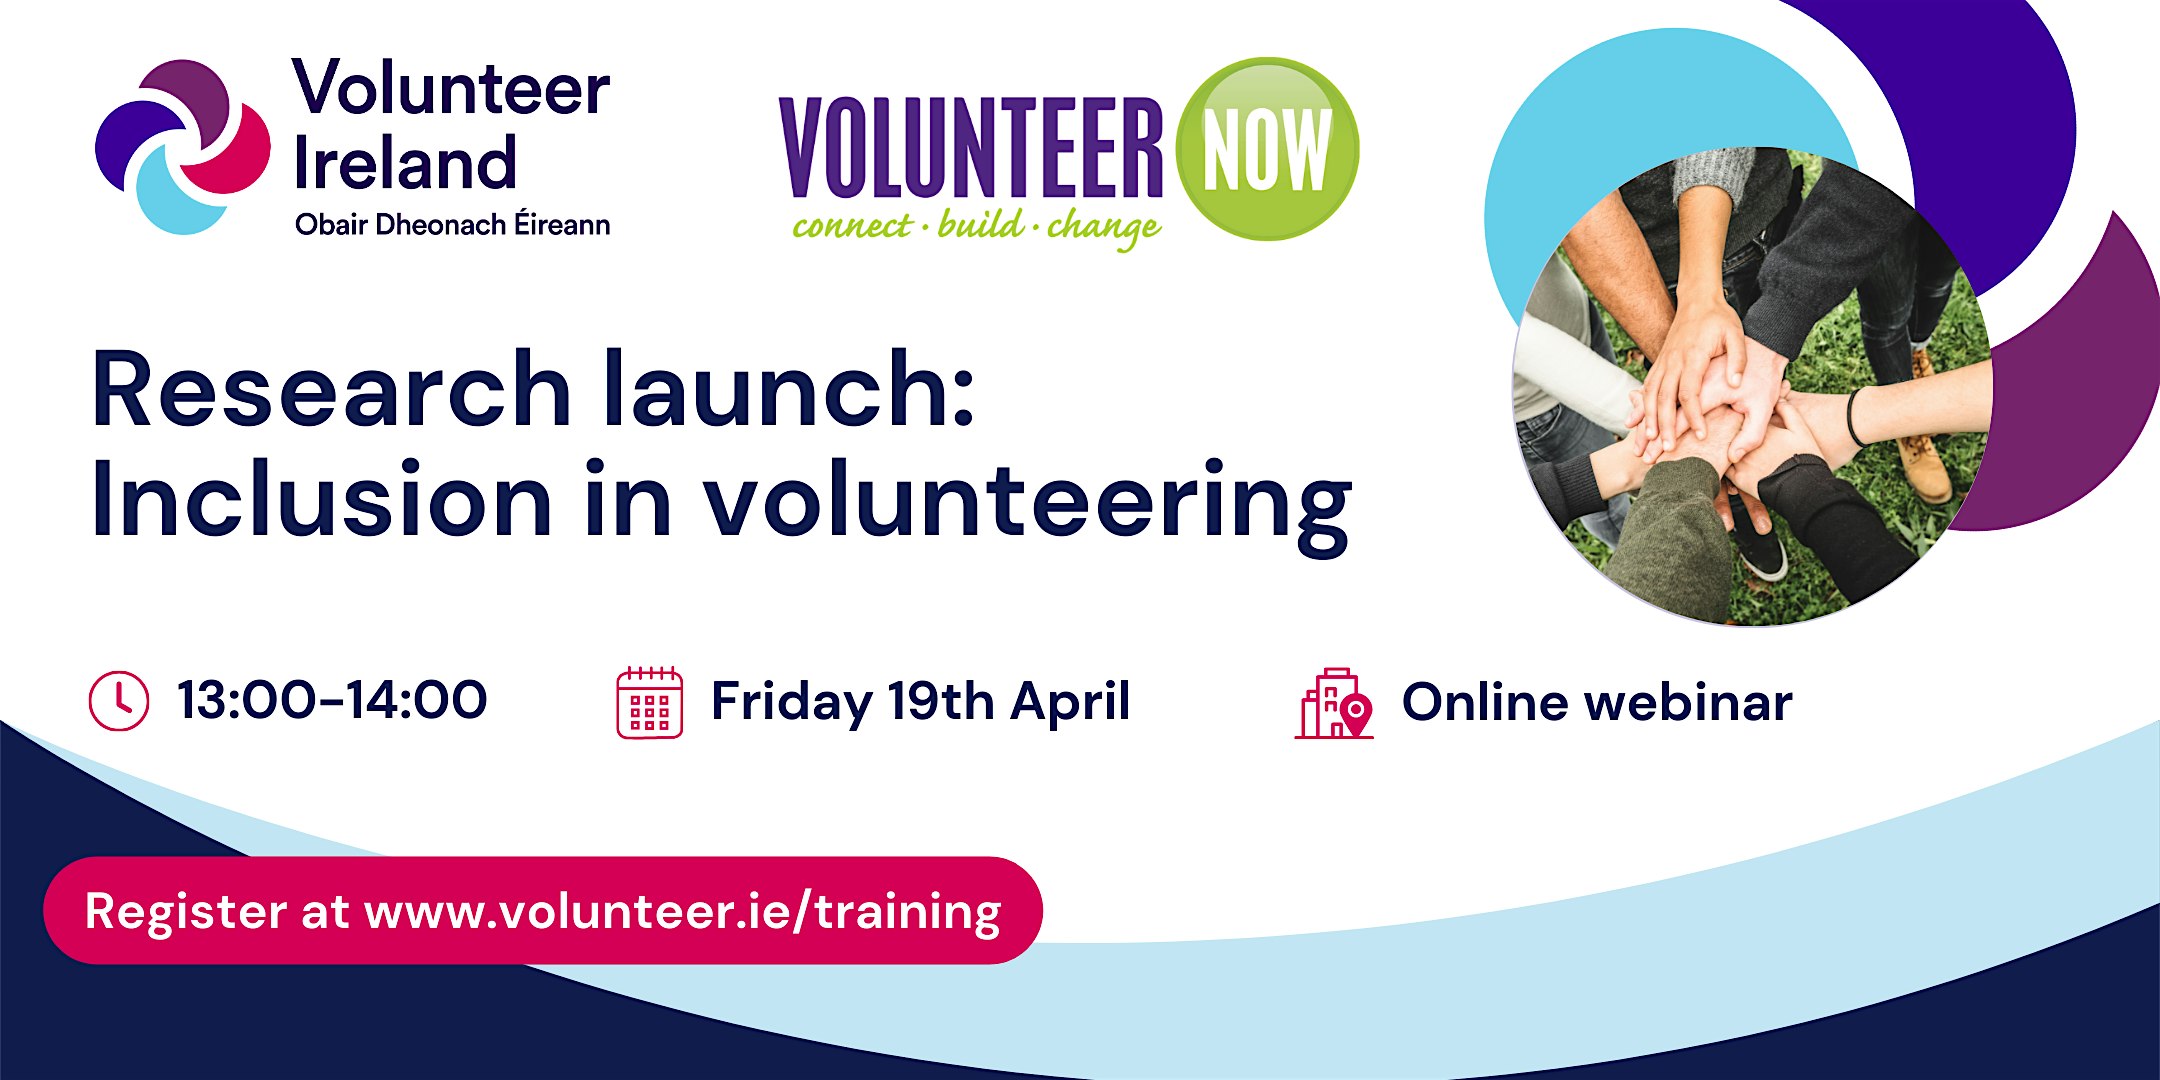 Research launch: Inclusion in volunteering programmes